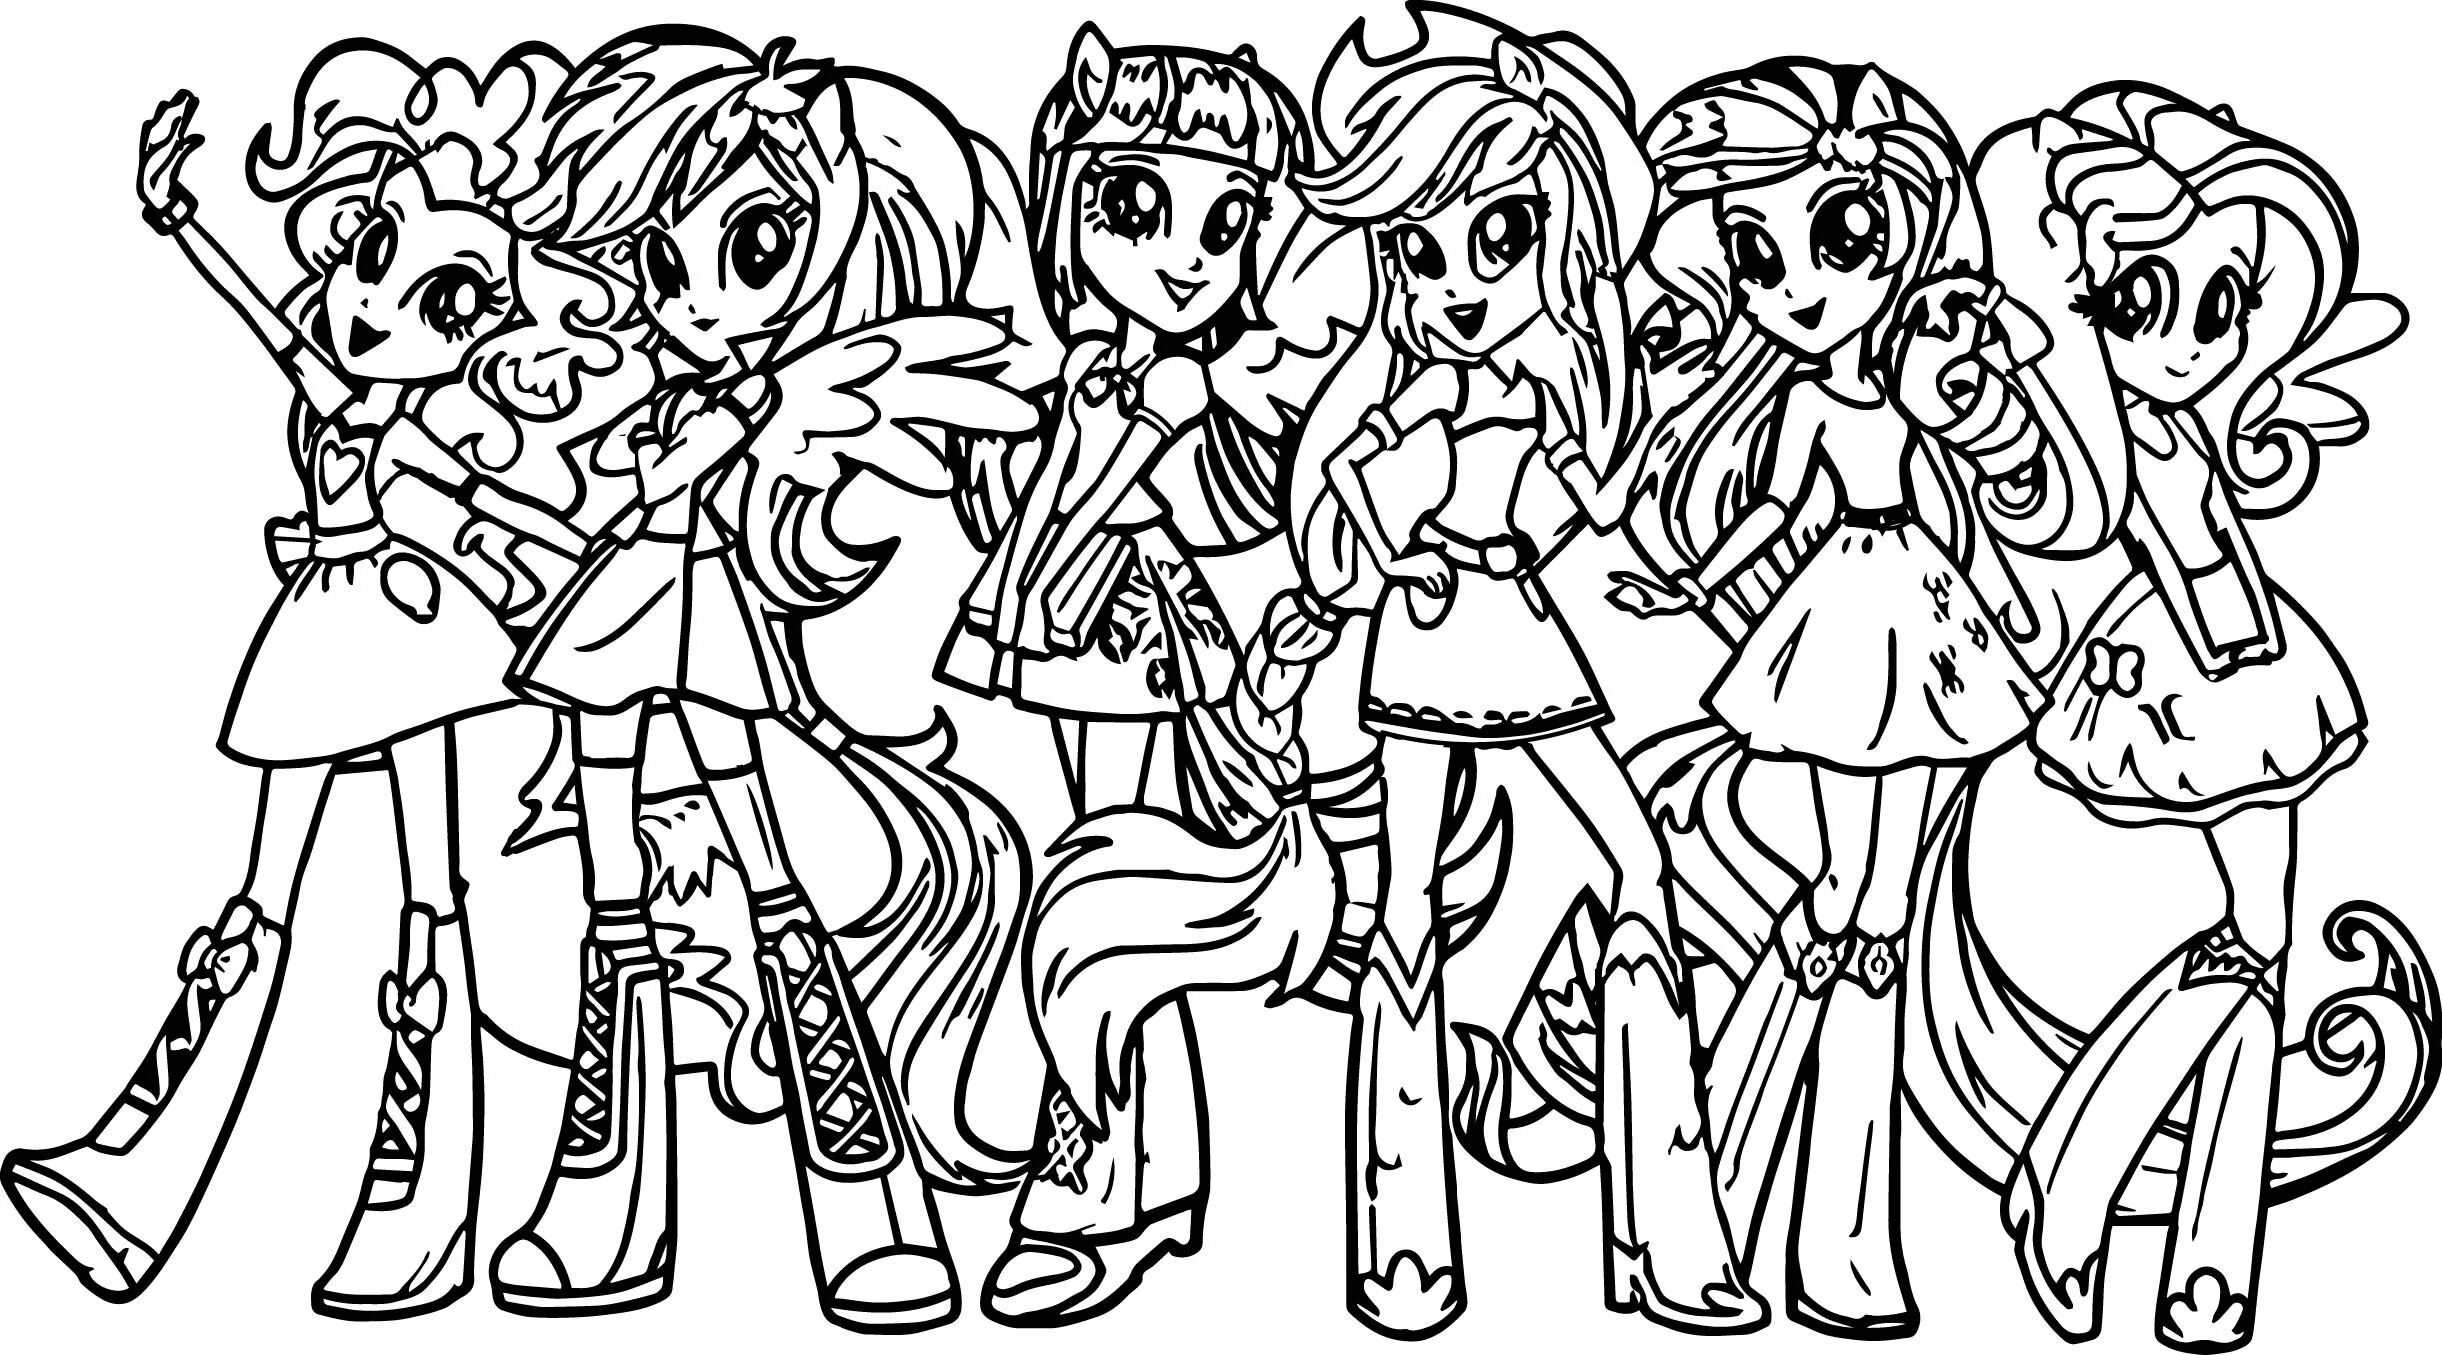 Playtime little pony girls coloring page